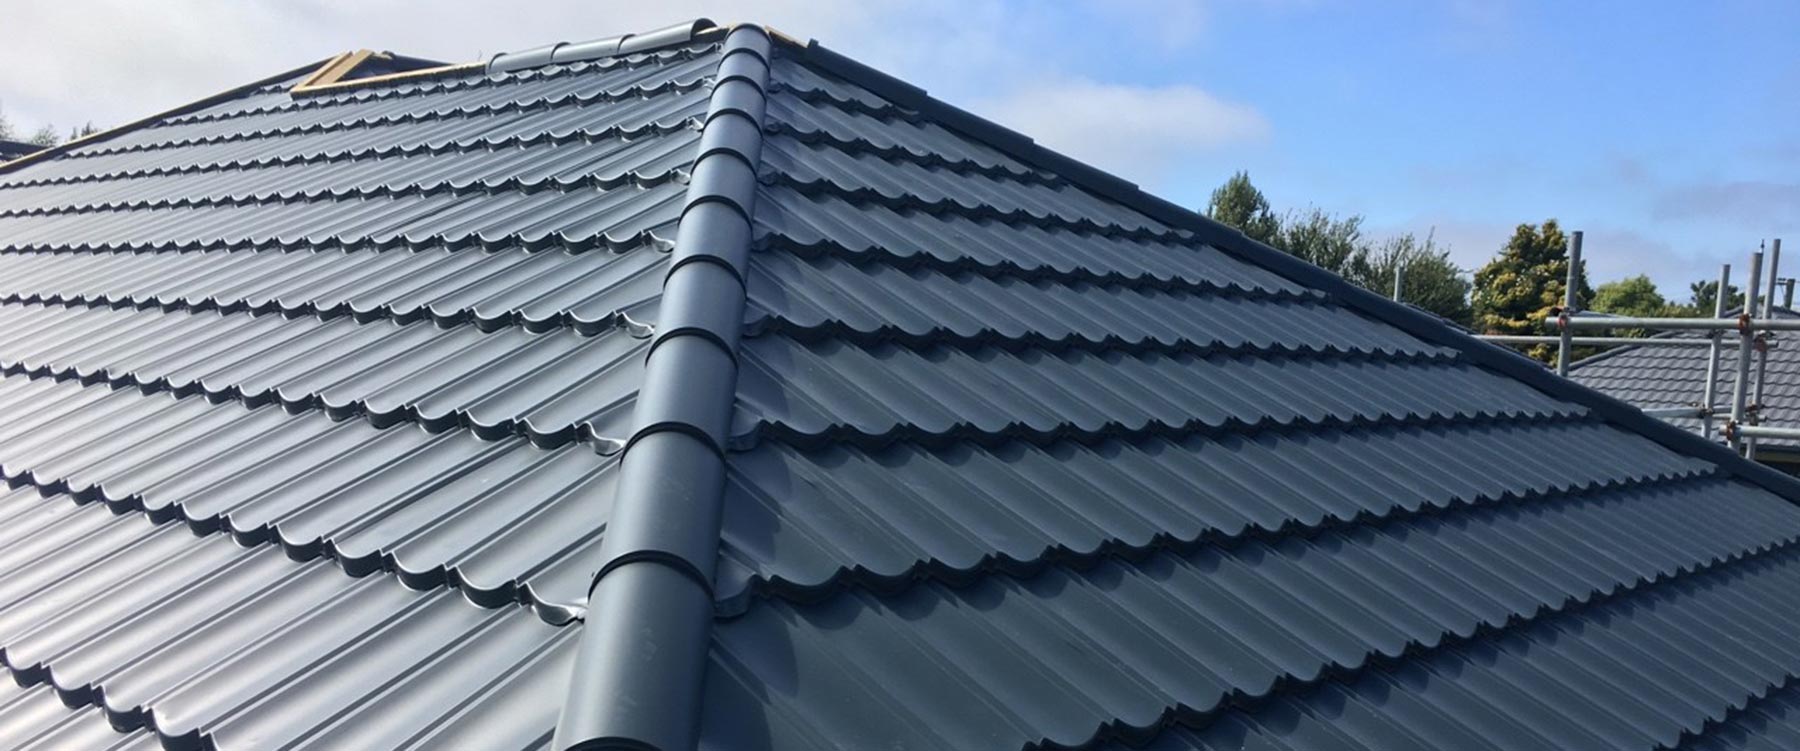 Metal Roofing Vs Traditional Tile Roofing - vrogue.co